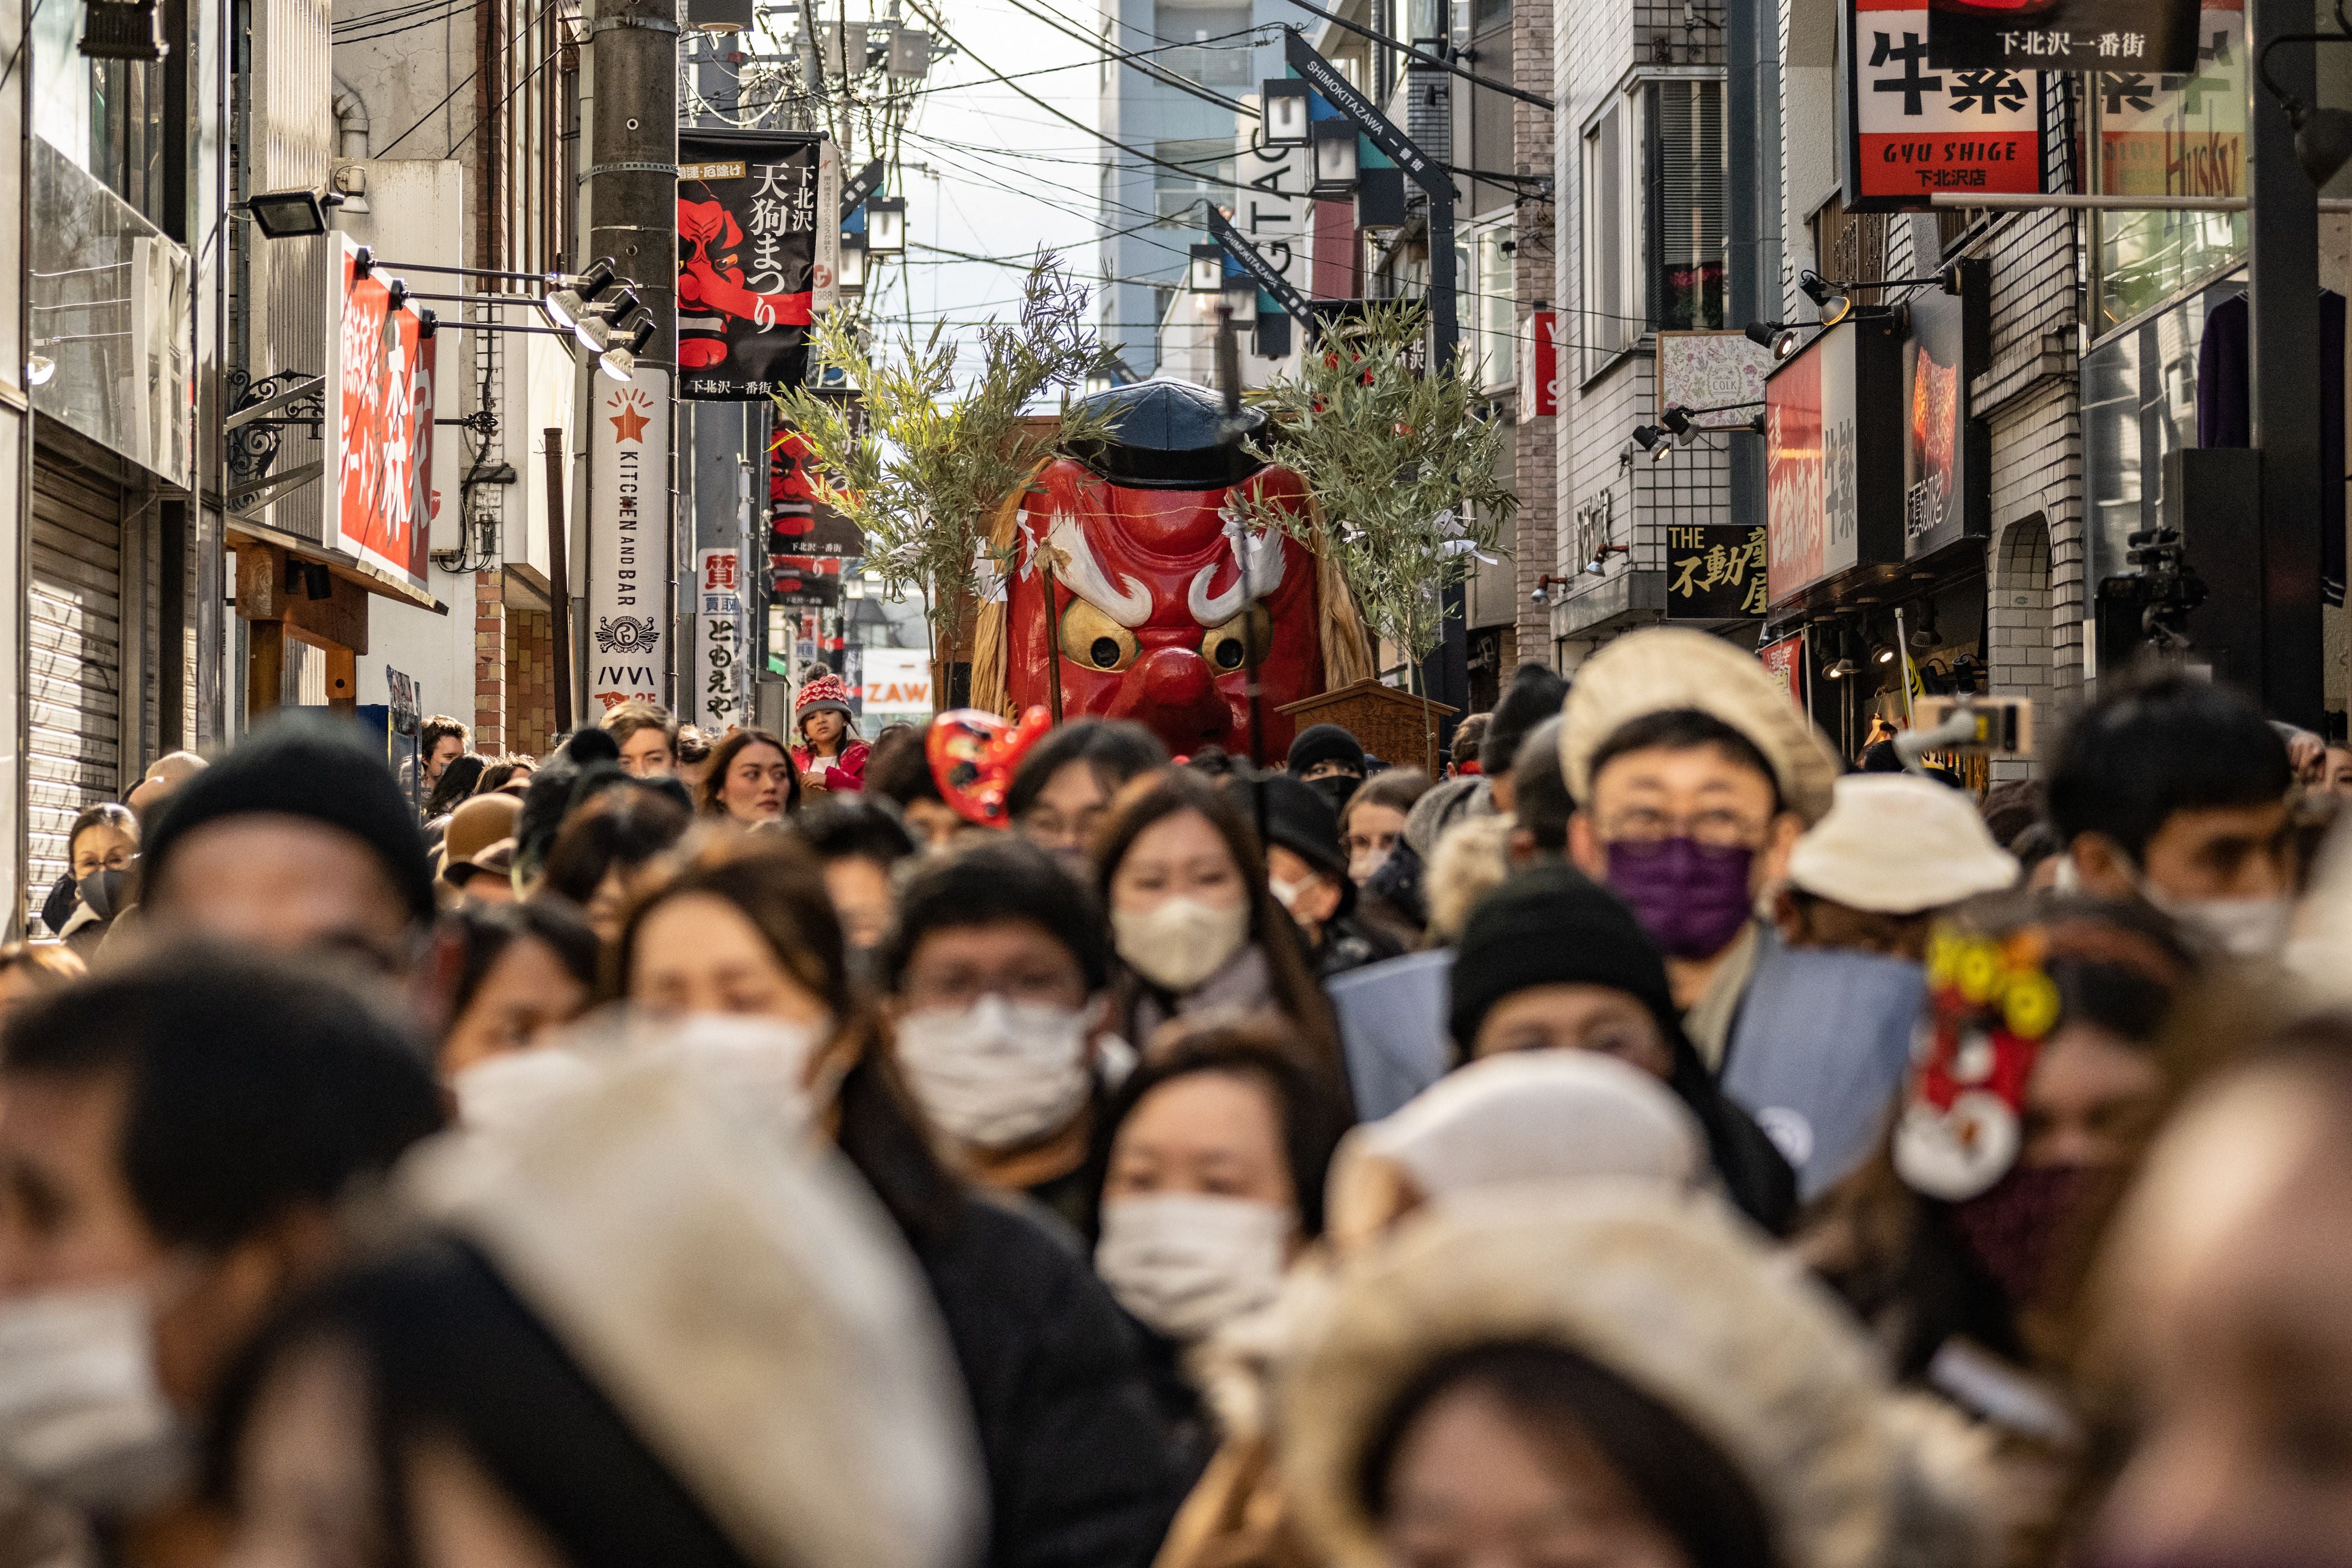 People march along a road with a large Tengu mask during the Tengu Parade, a traditional event held to drive away evil spirits and to bring good luck, at the Shimokitazawa shopping district in Tokyo on 28 January